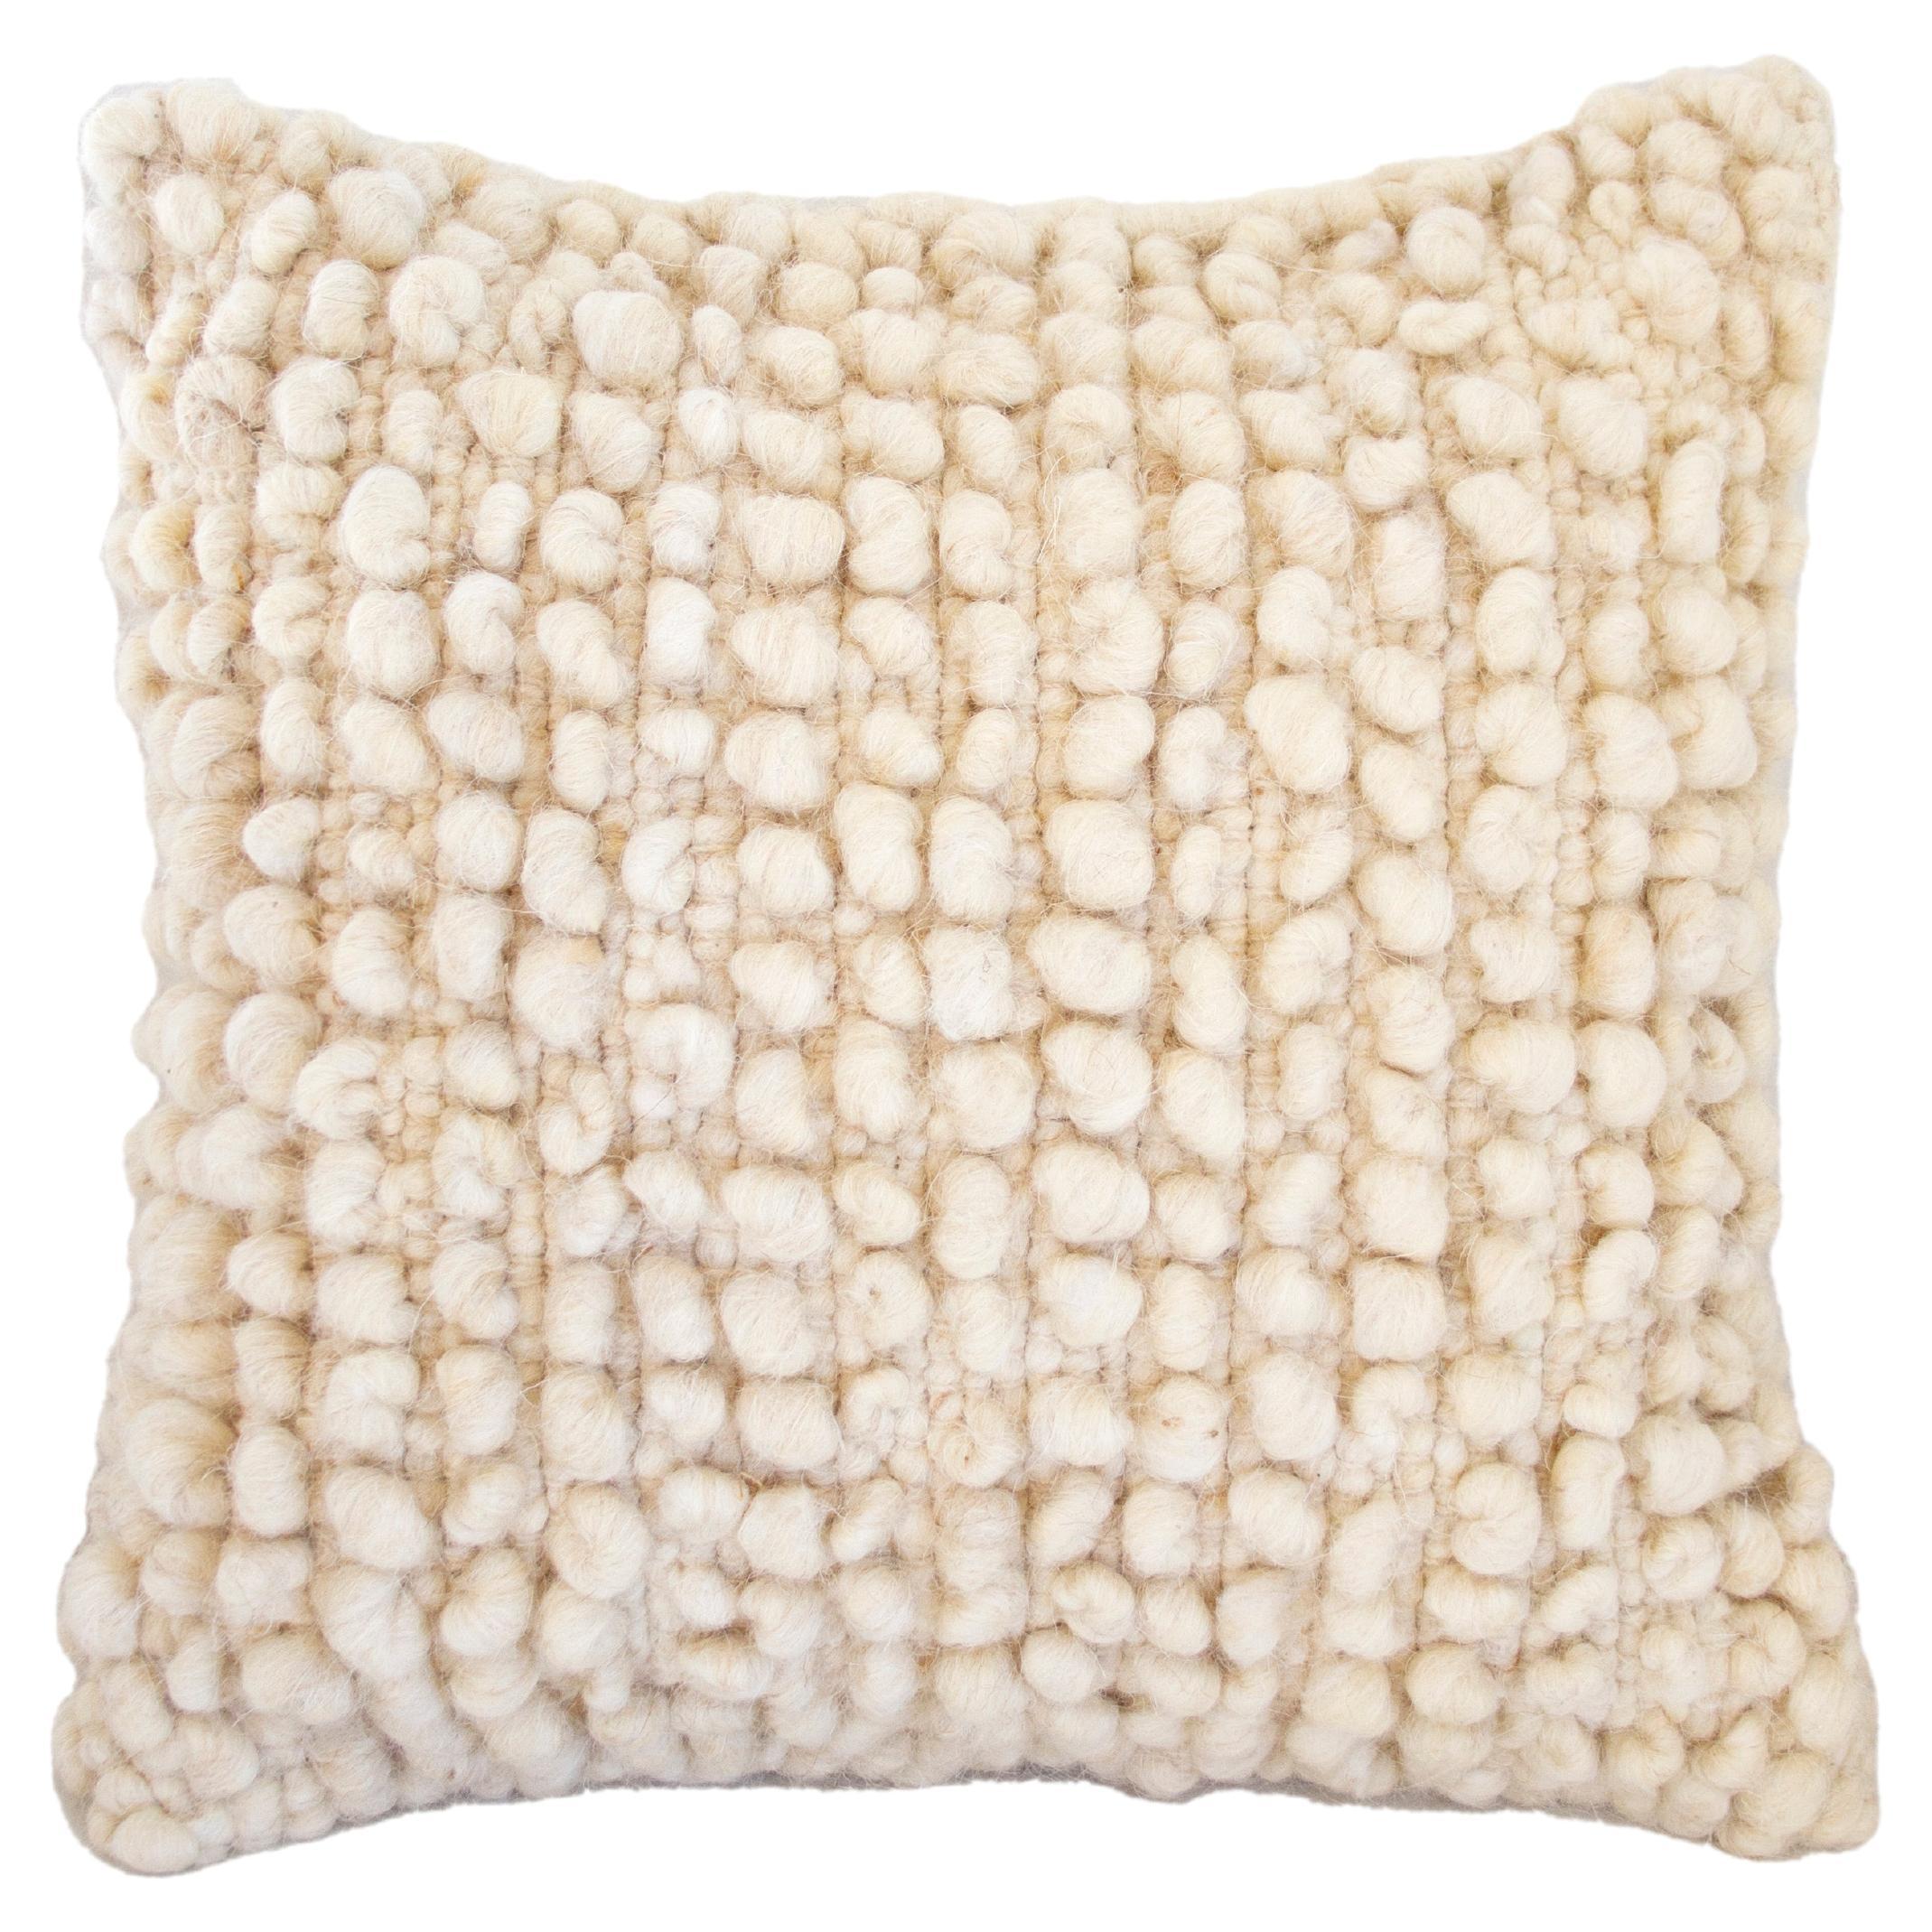 Fatima Bobble Throw Pillow in Cream White made from 100% sheep wool - 20" x 20" For Sale